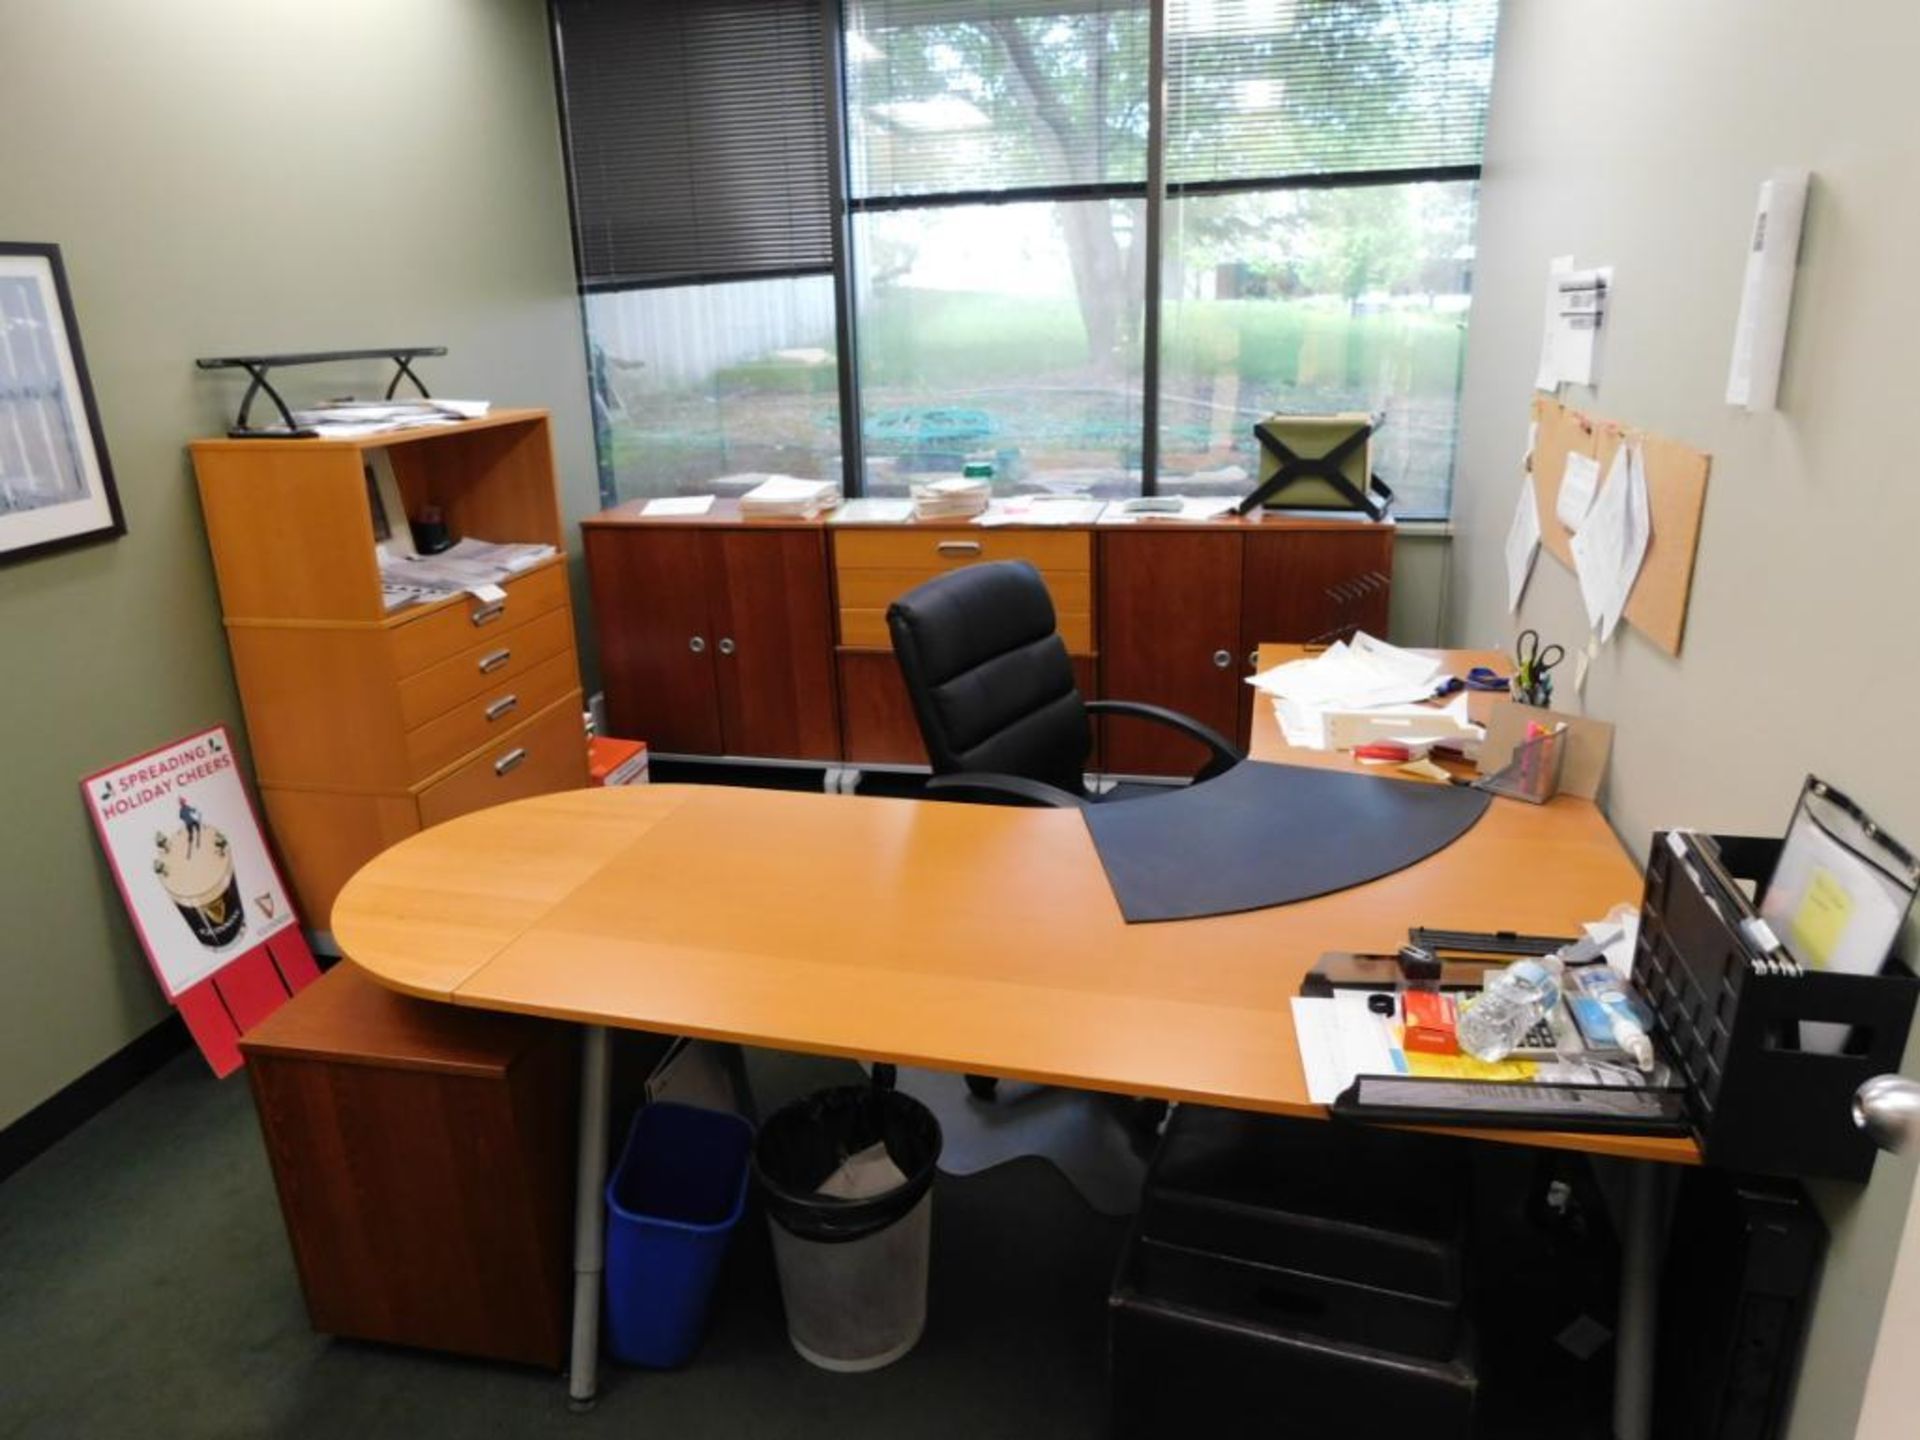 LOT: Contents of (2) Offices and Hall - (2) Desks and Assorted Cabinets, (5) Chairs and Display Tabl